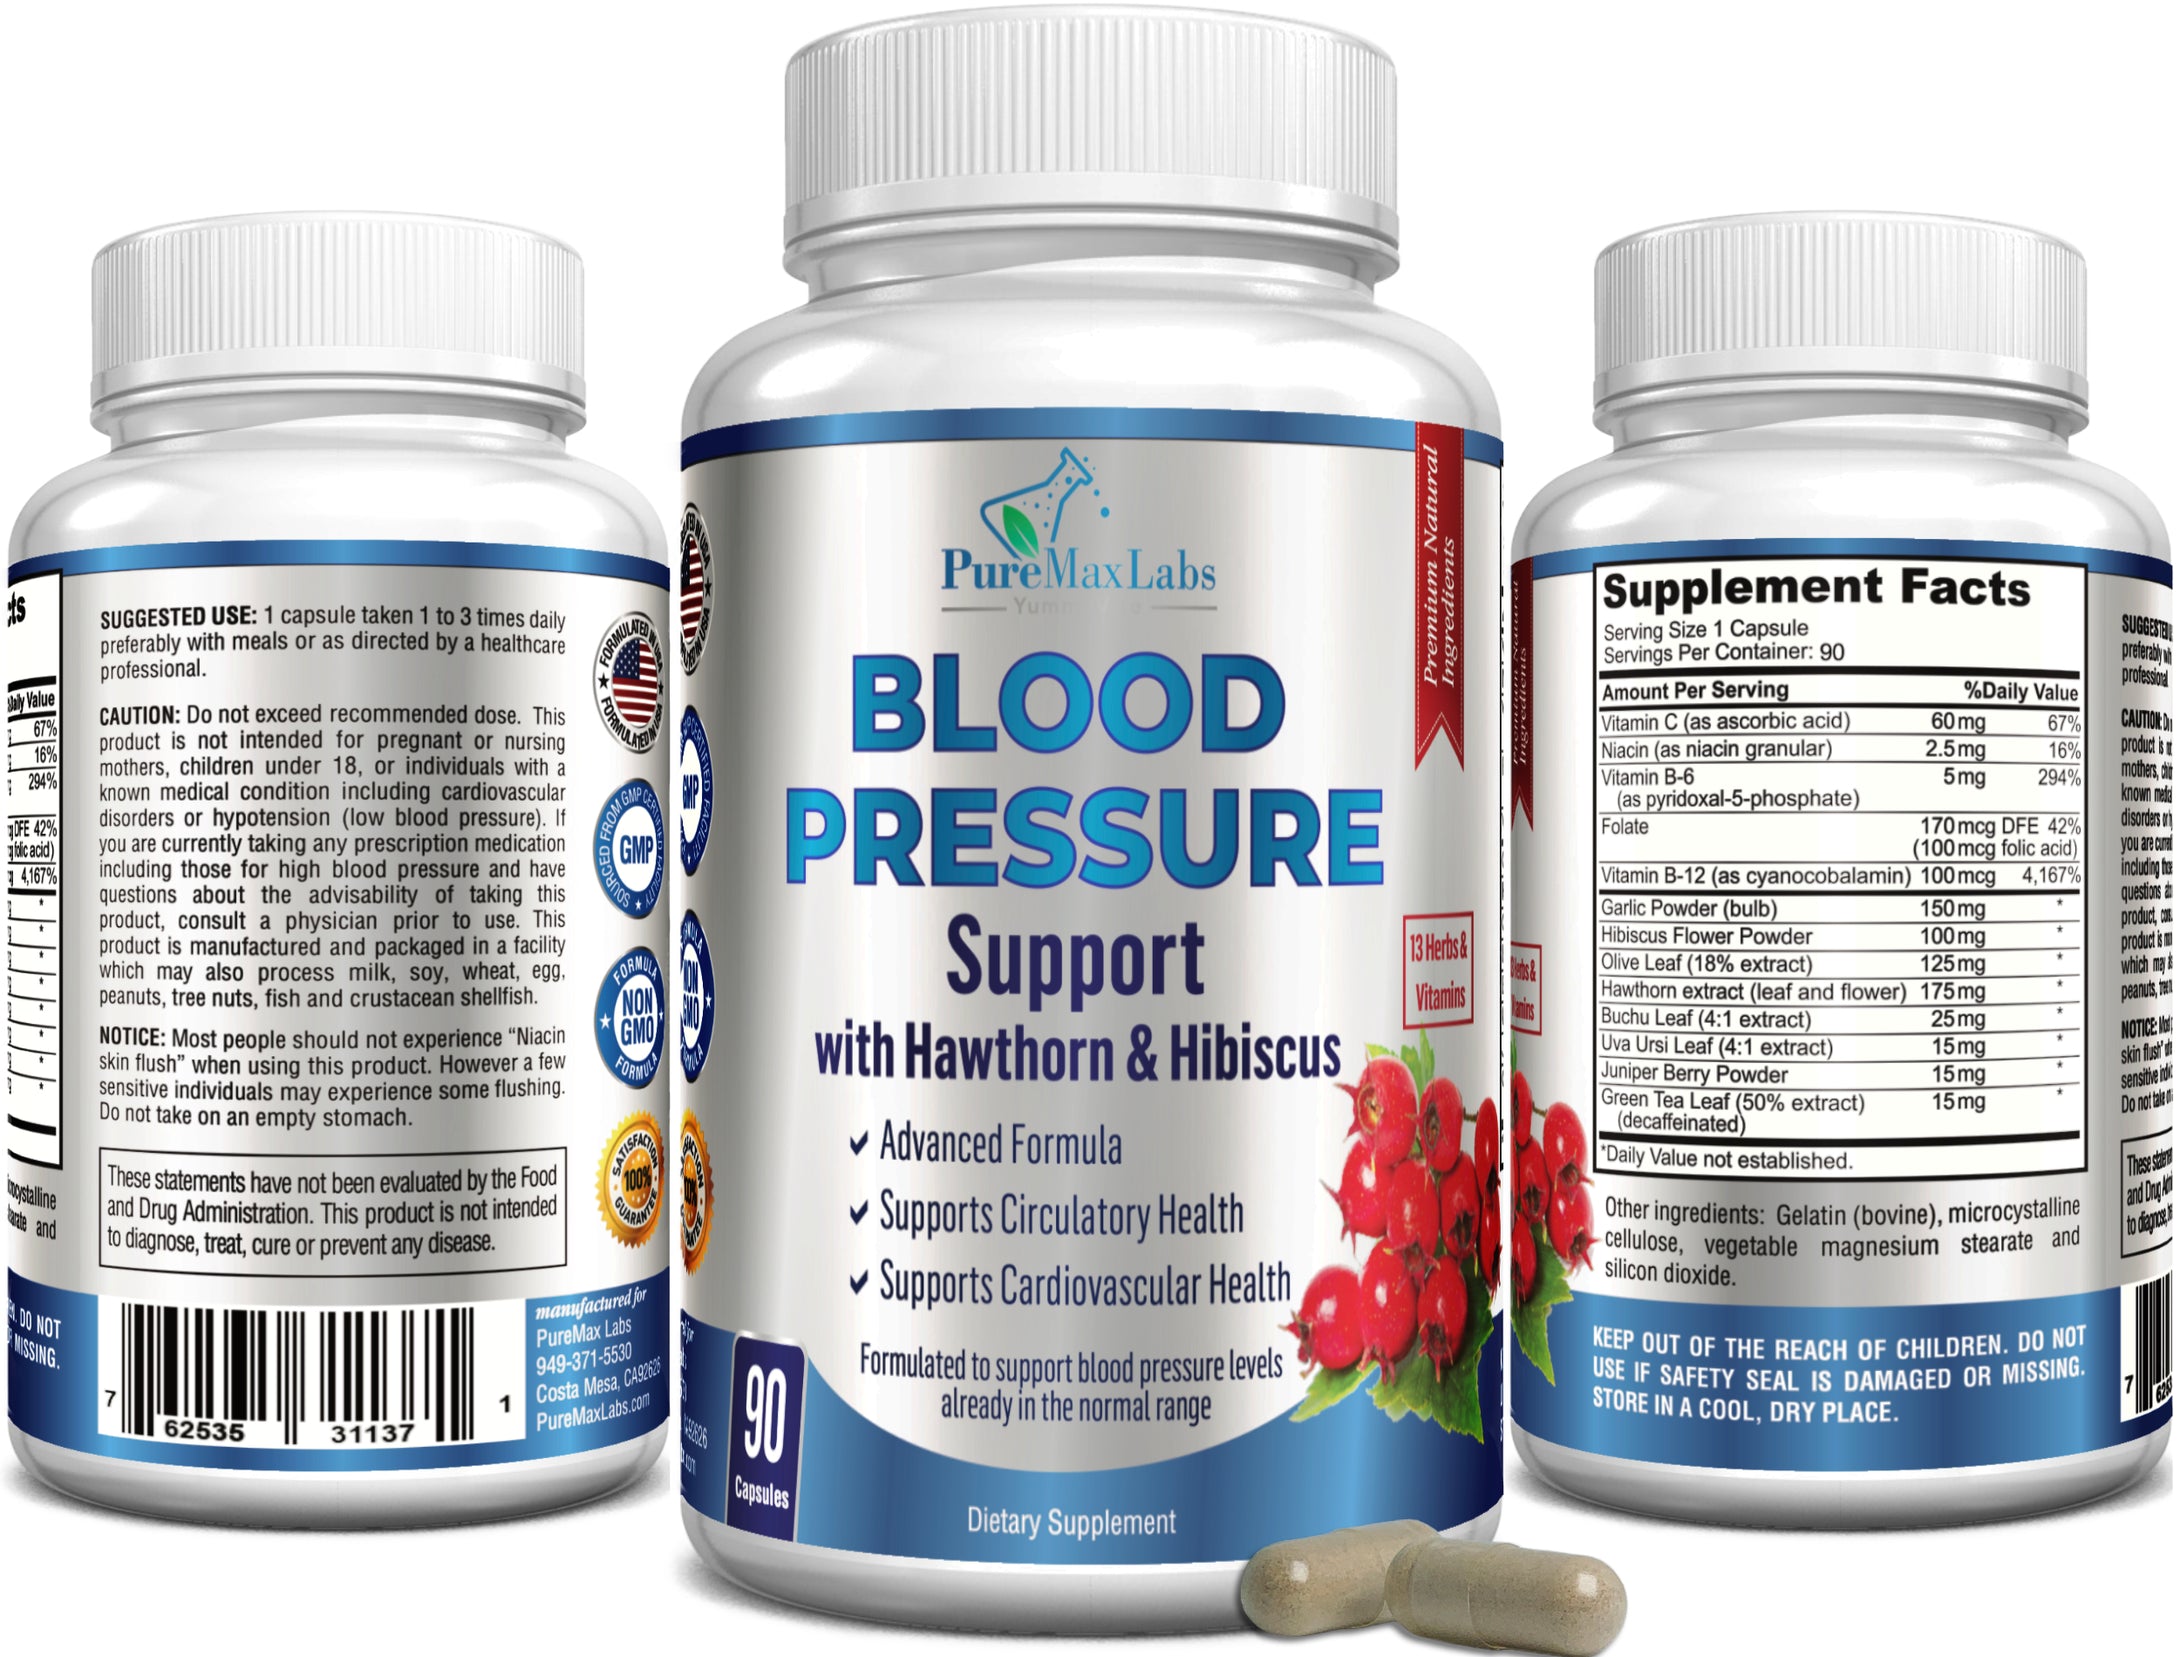 Blood Pressure Support with Hawthorn & Hibiscus - 90 Capsules